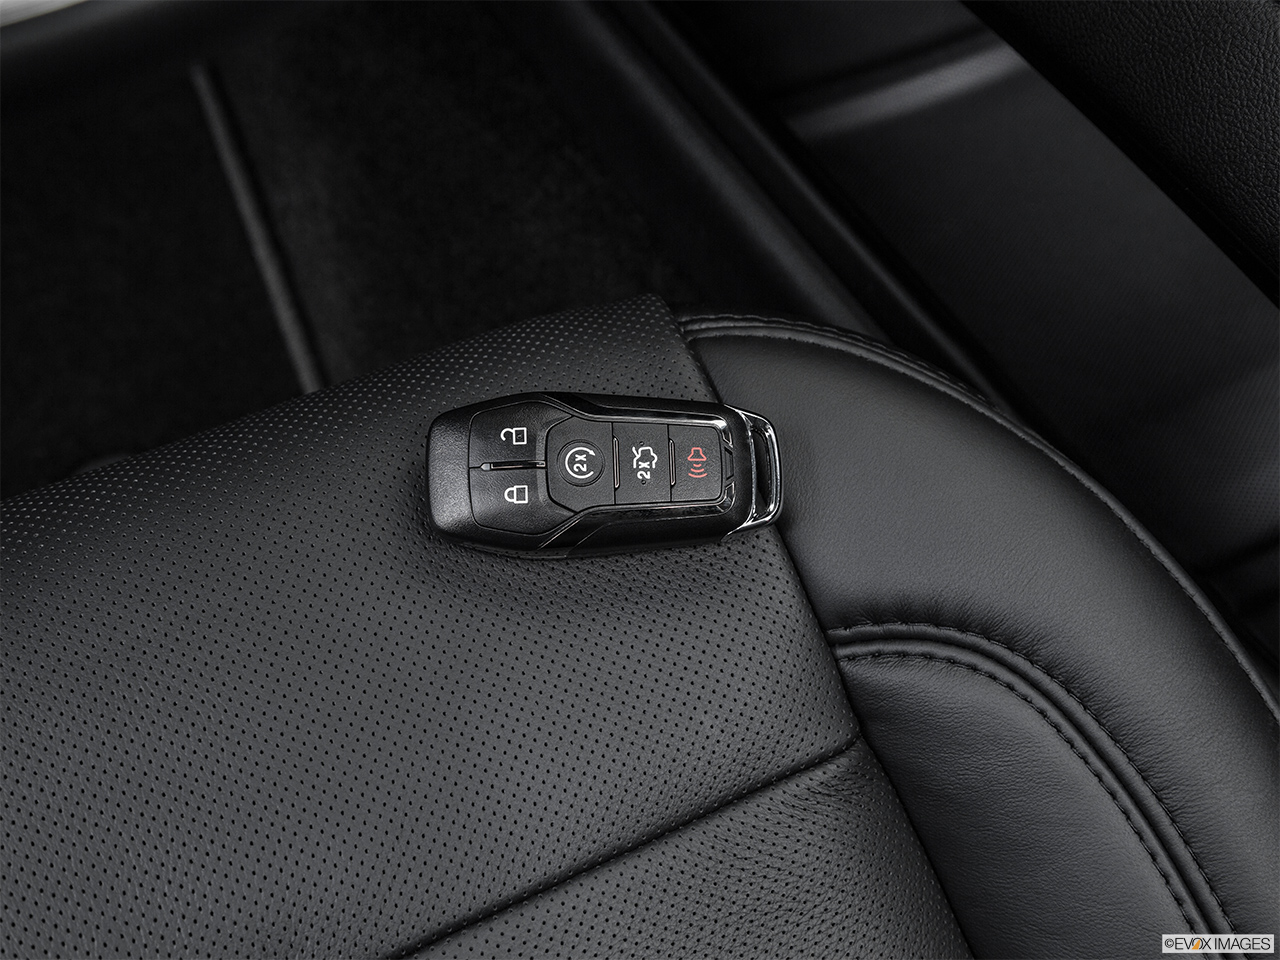 2016 Lincoln MKZ 2.0L EcoBoost FWD Key fob on driver's seat. 